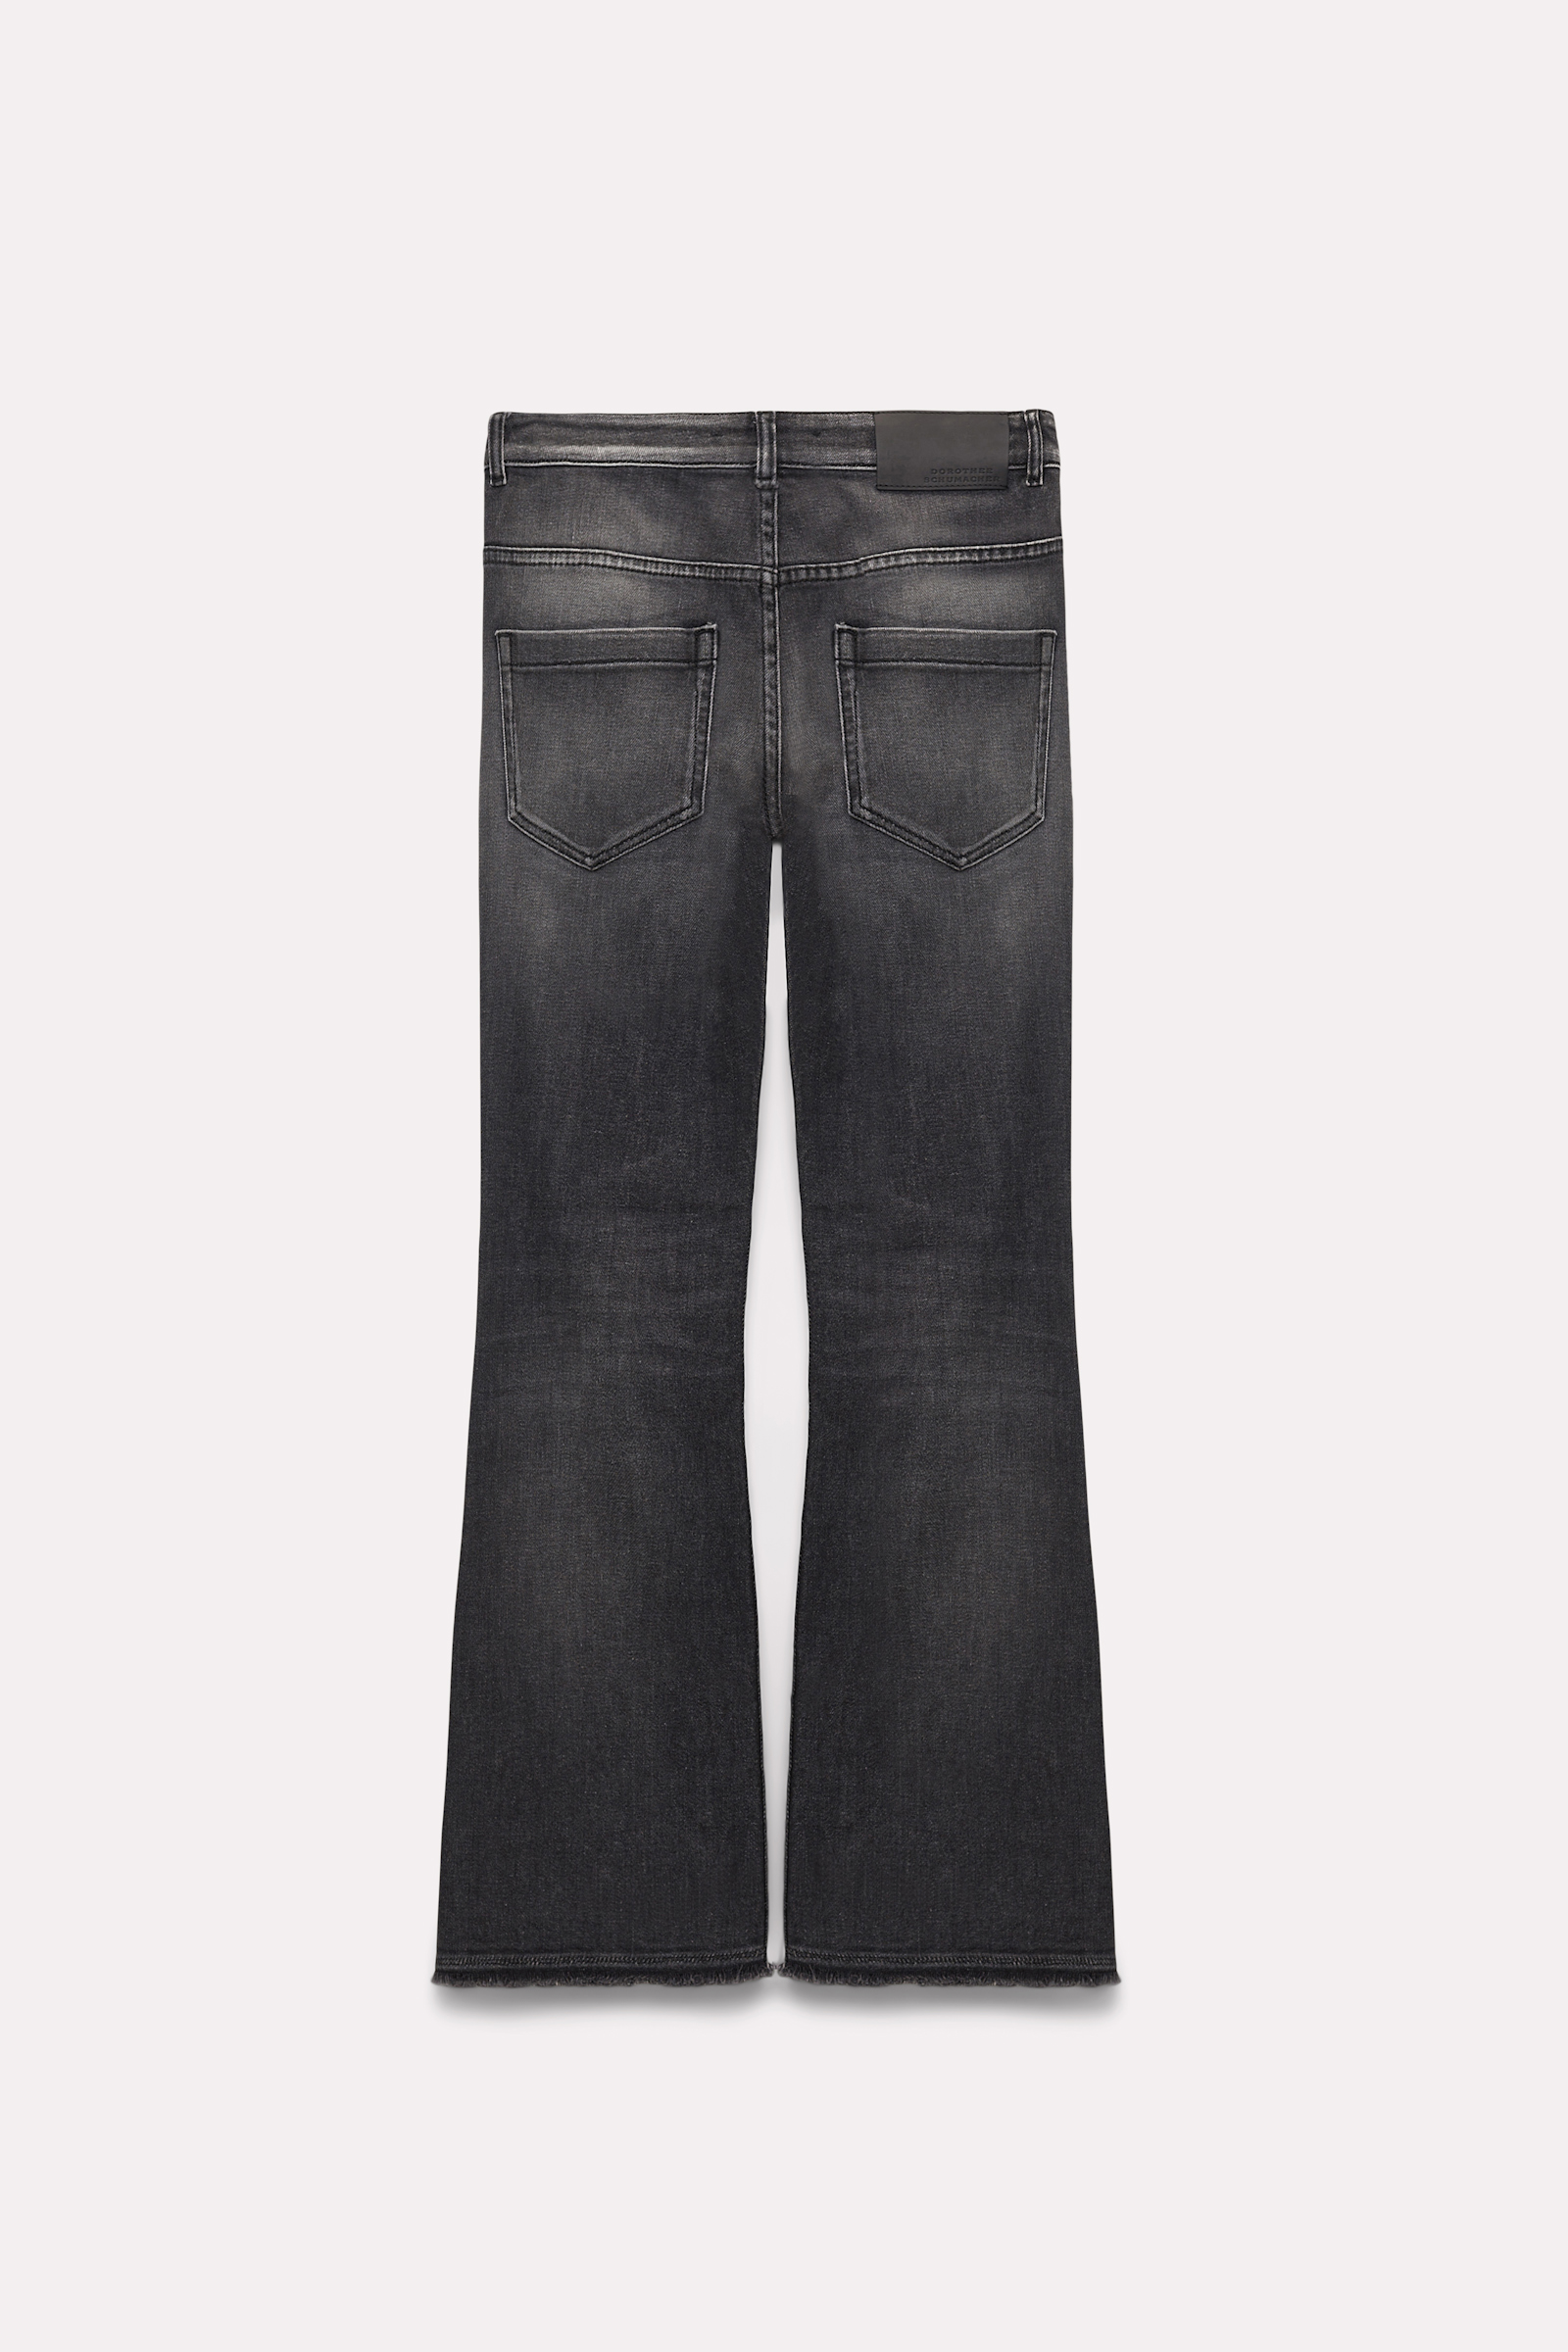 Dorothee Schumacher Cropped jeans with asymmetrical hem structured grey